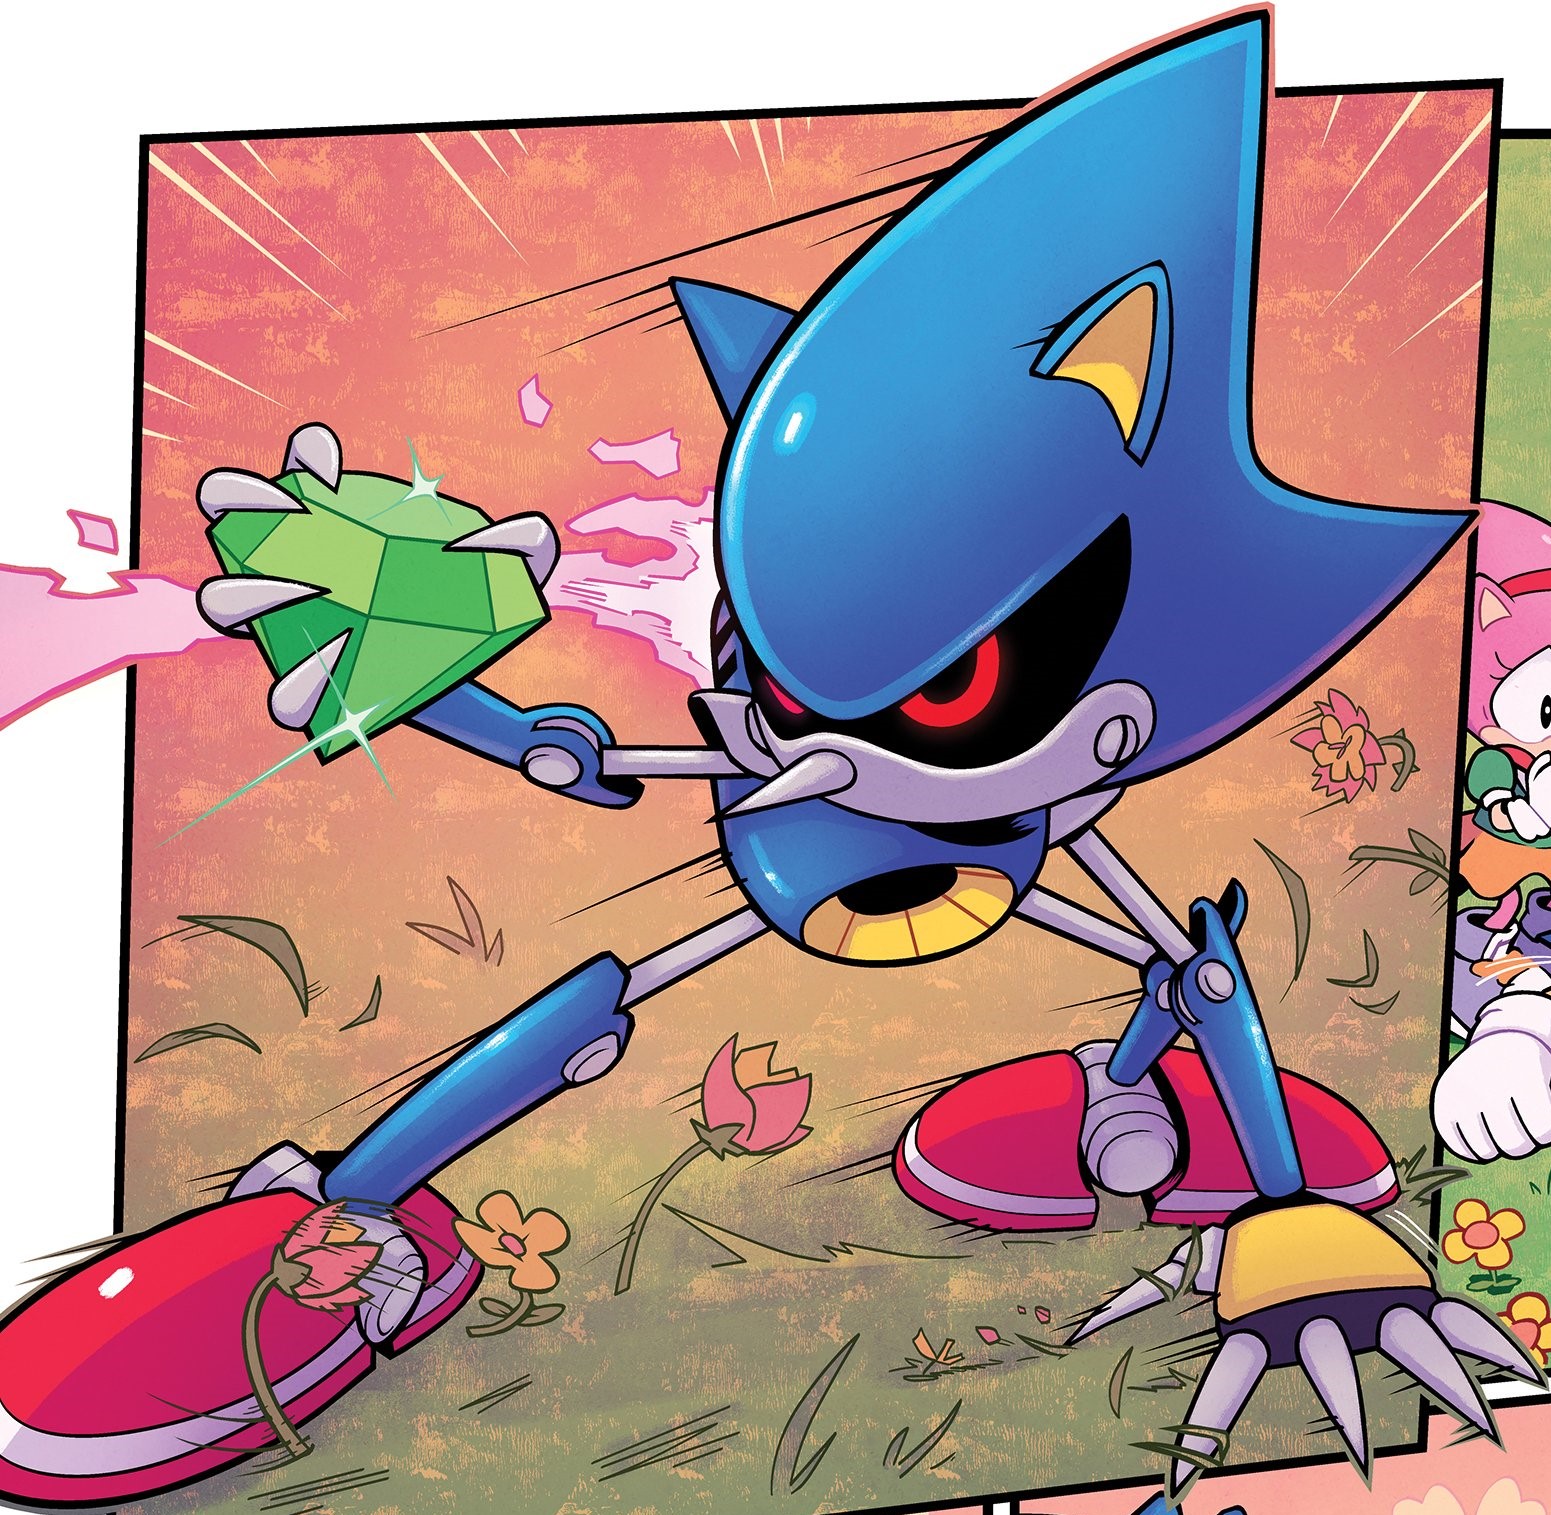 When you realize that Sonic Generations' Classic Metal Sonic is